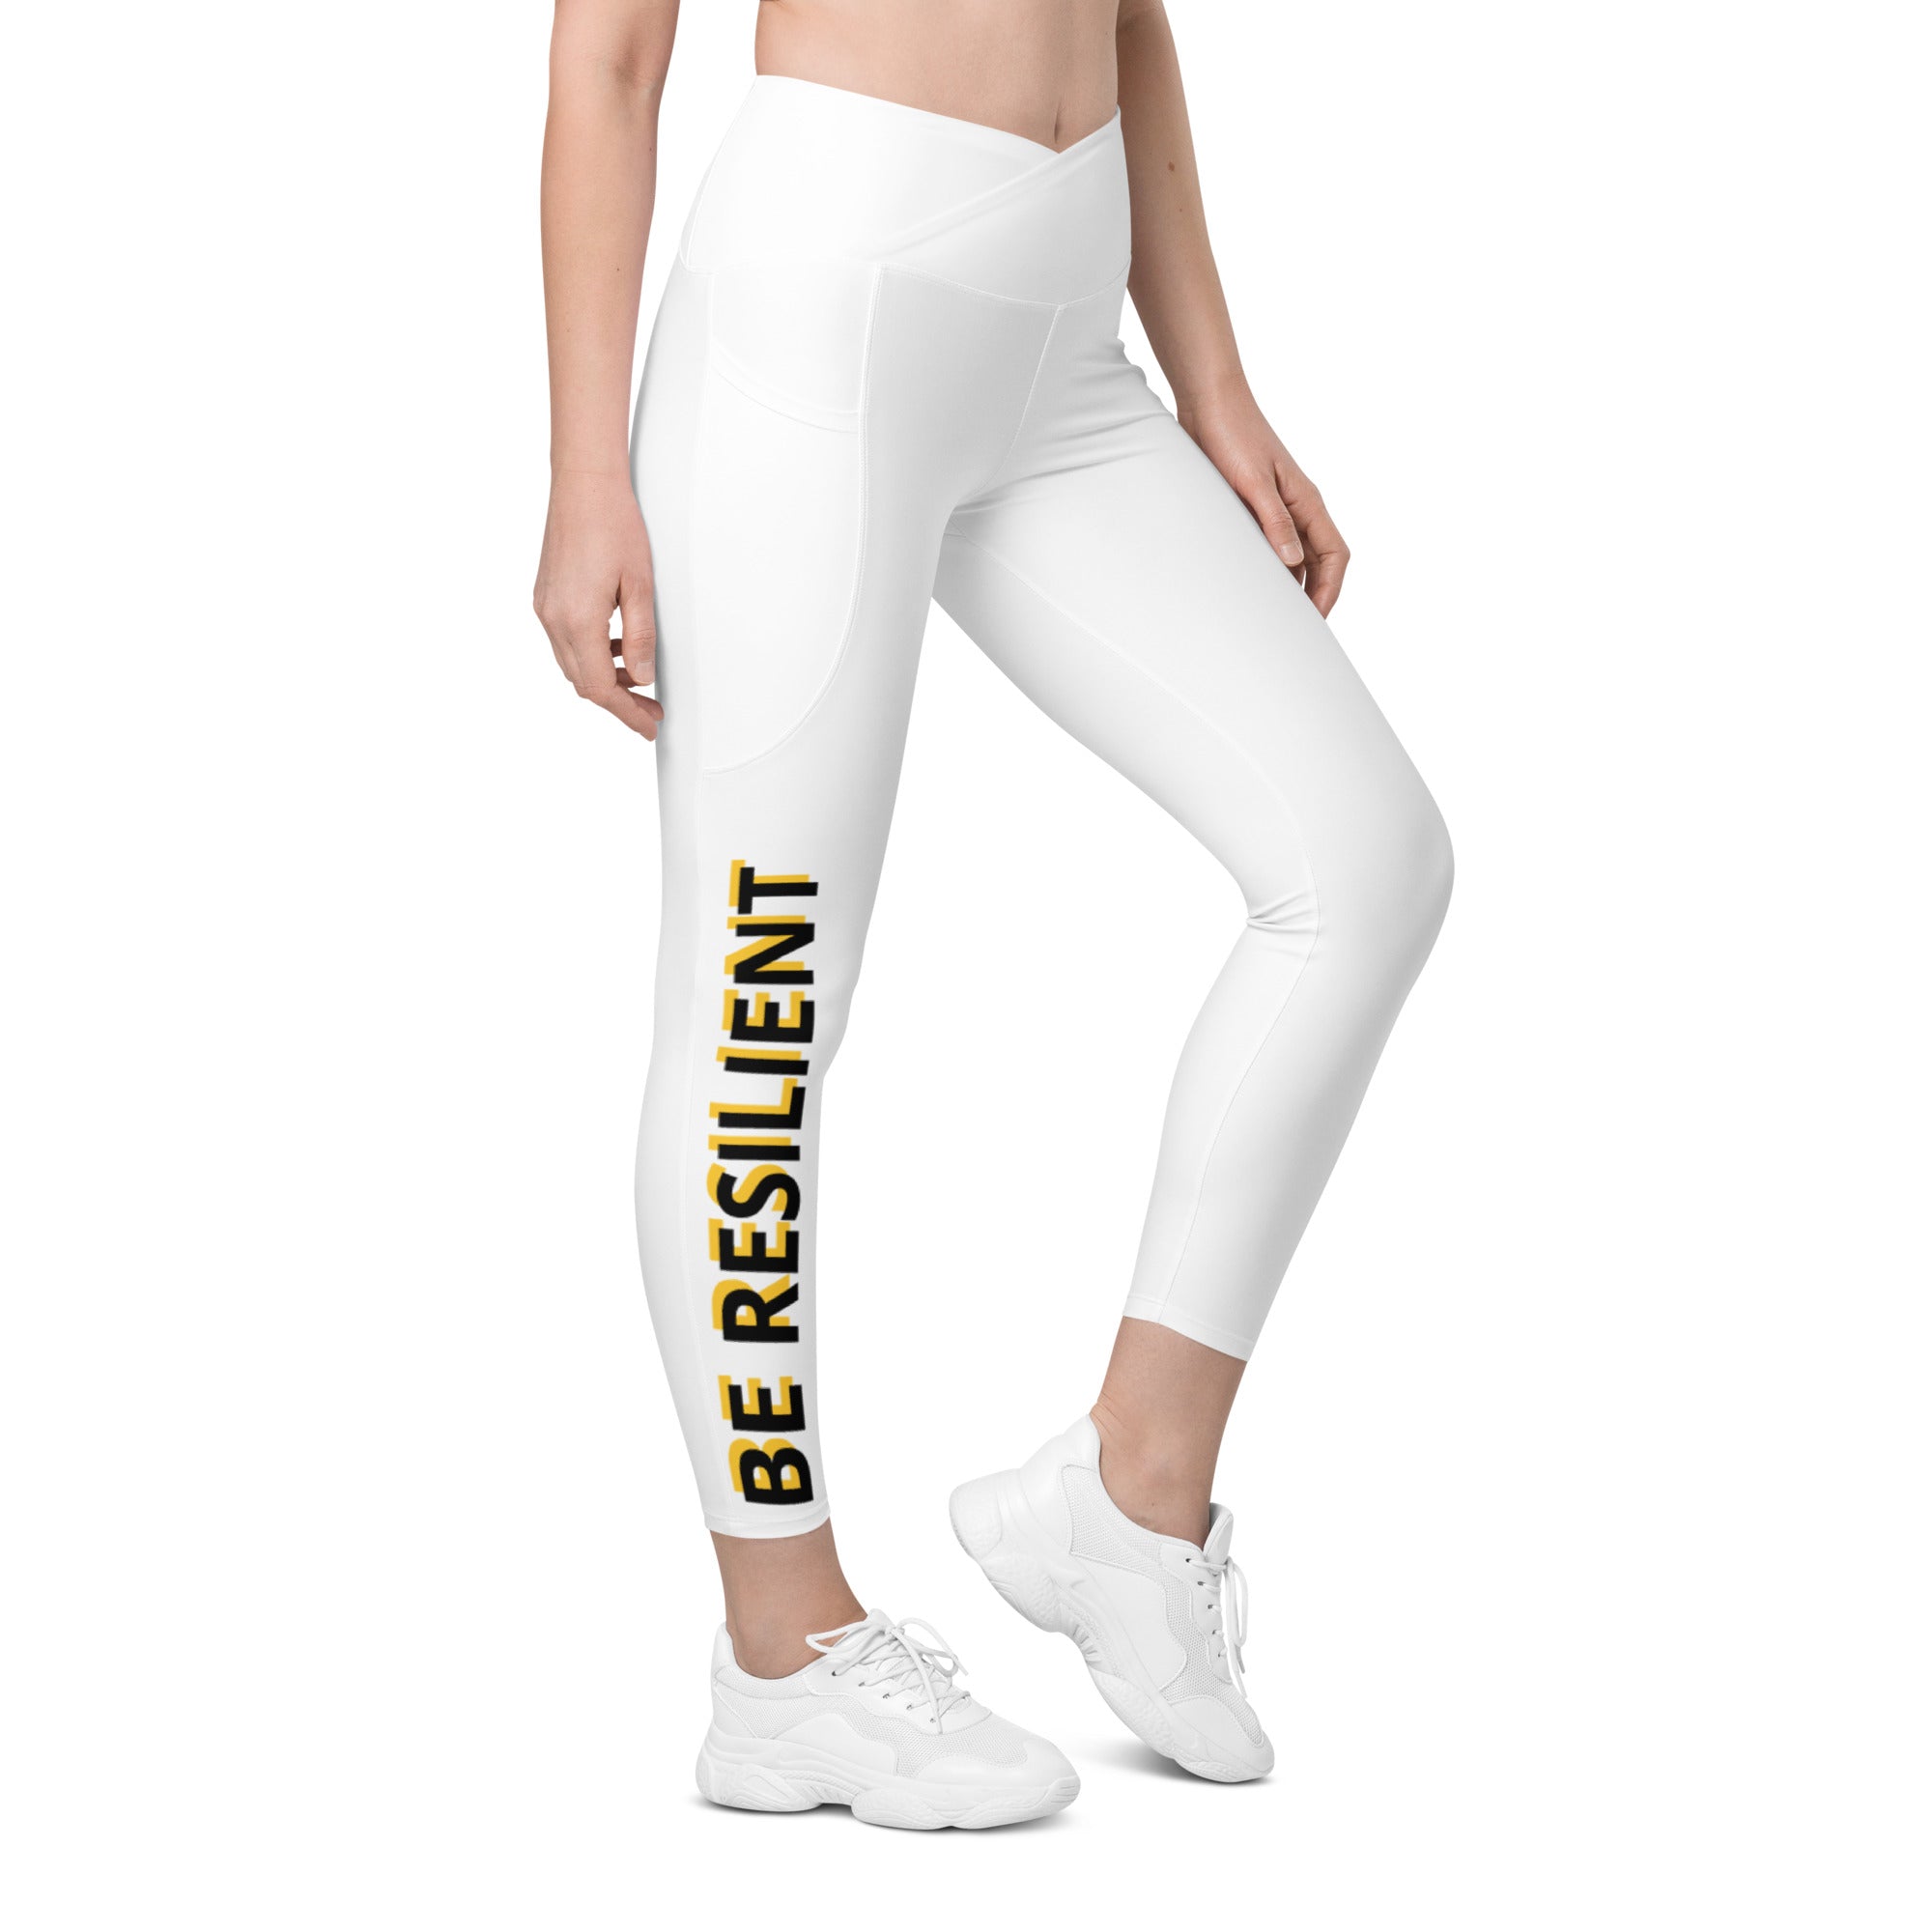 Crossover leggings with pockets - Motus - XPhit